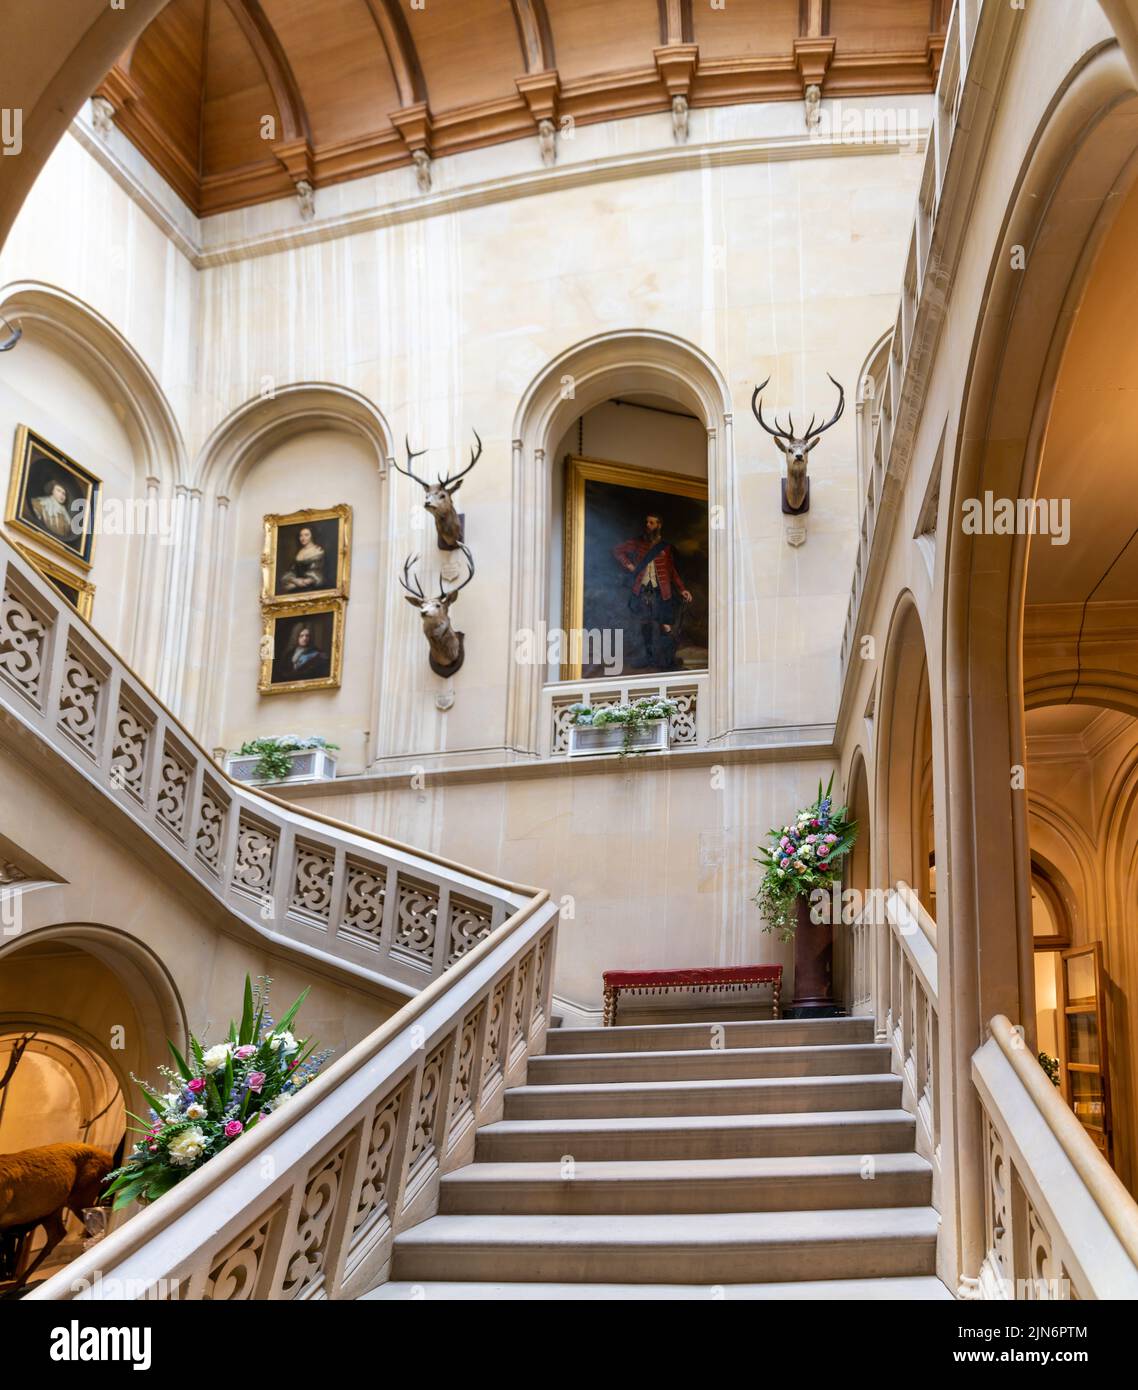 Golspie, United Kingdom - 25 June, 2022: interior view of the foyer and entrance staircase with paintings and hunting trophies in Dunrobin Castle Stock Photo